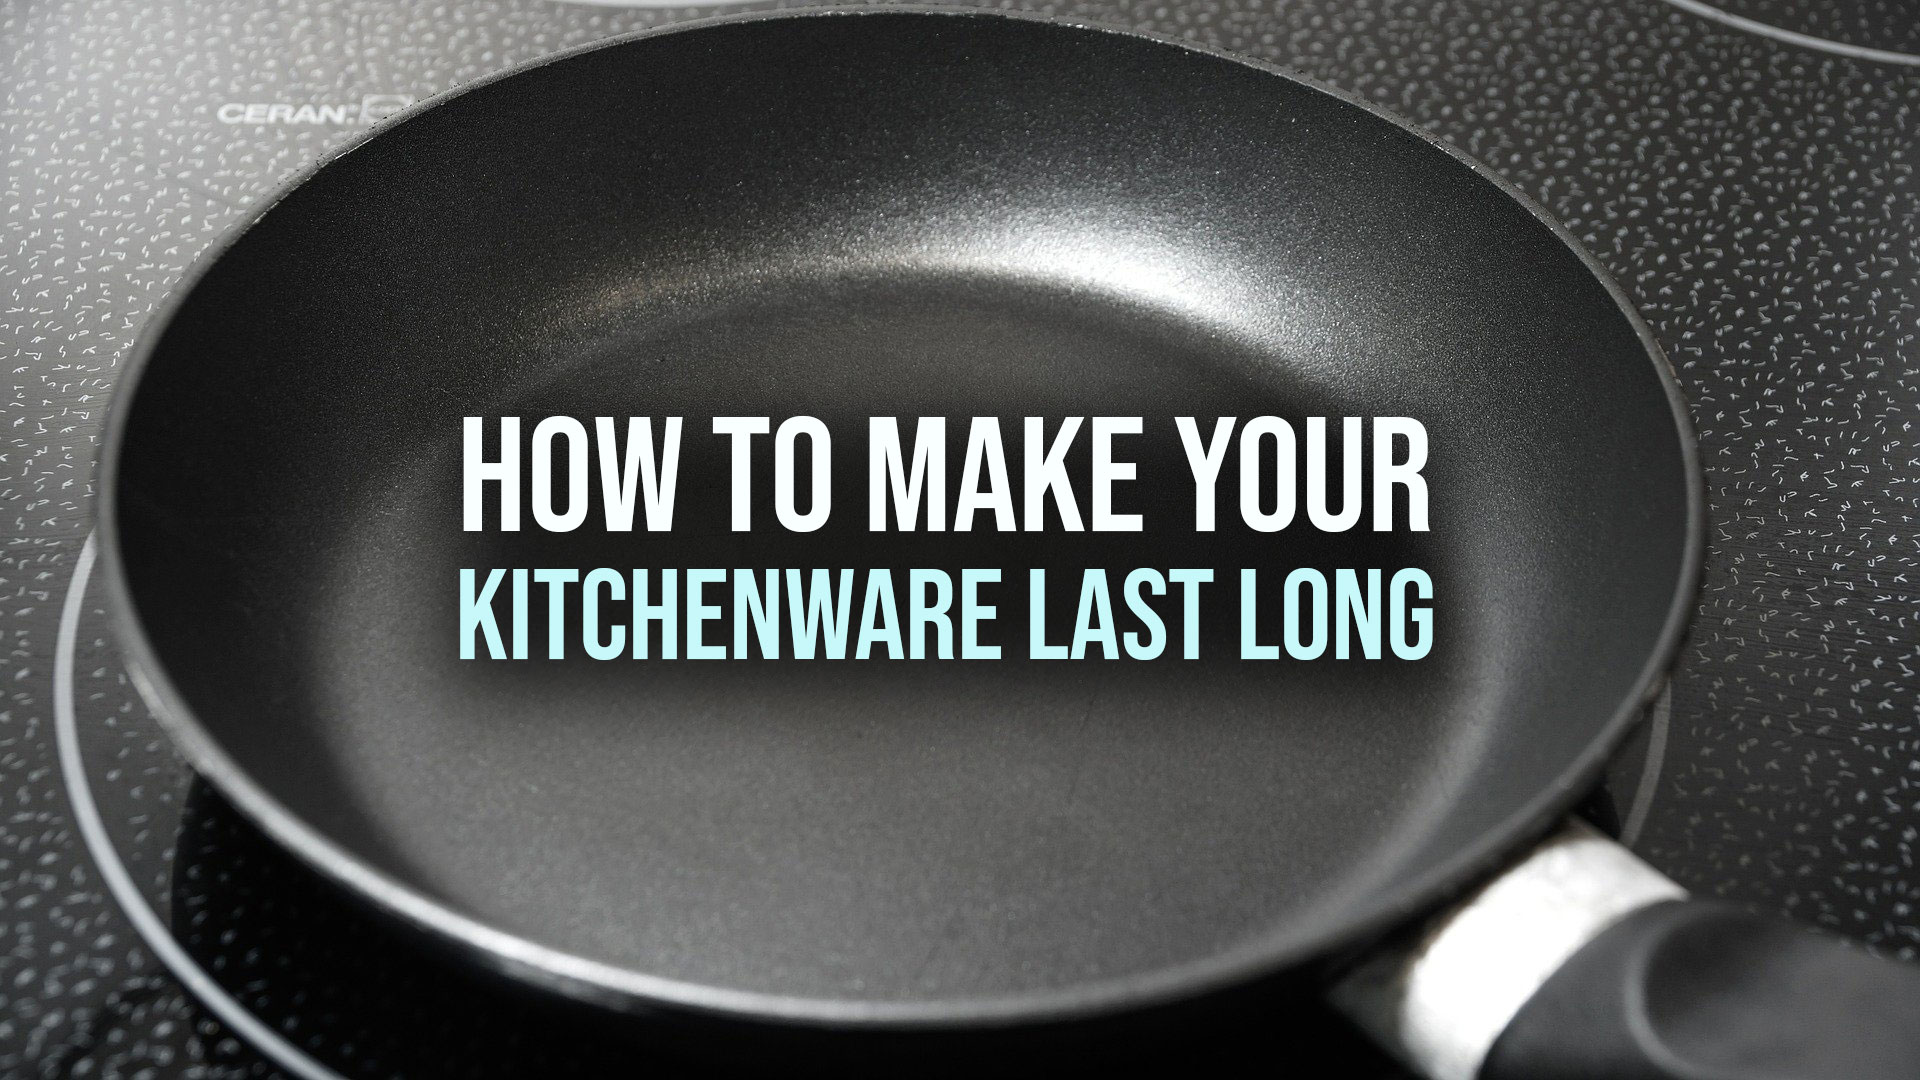 How to Make Your Kitchenware Last Long